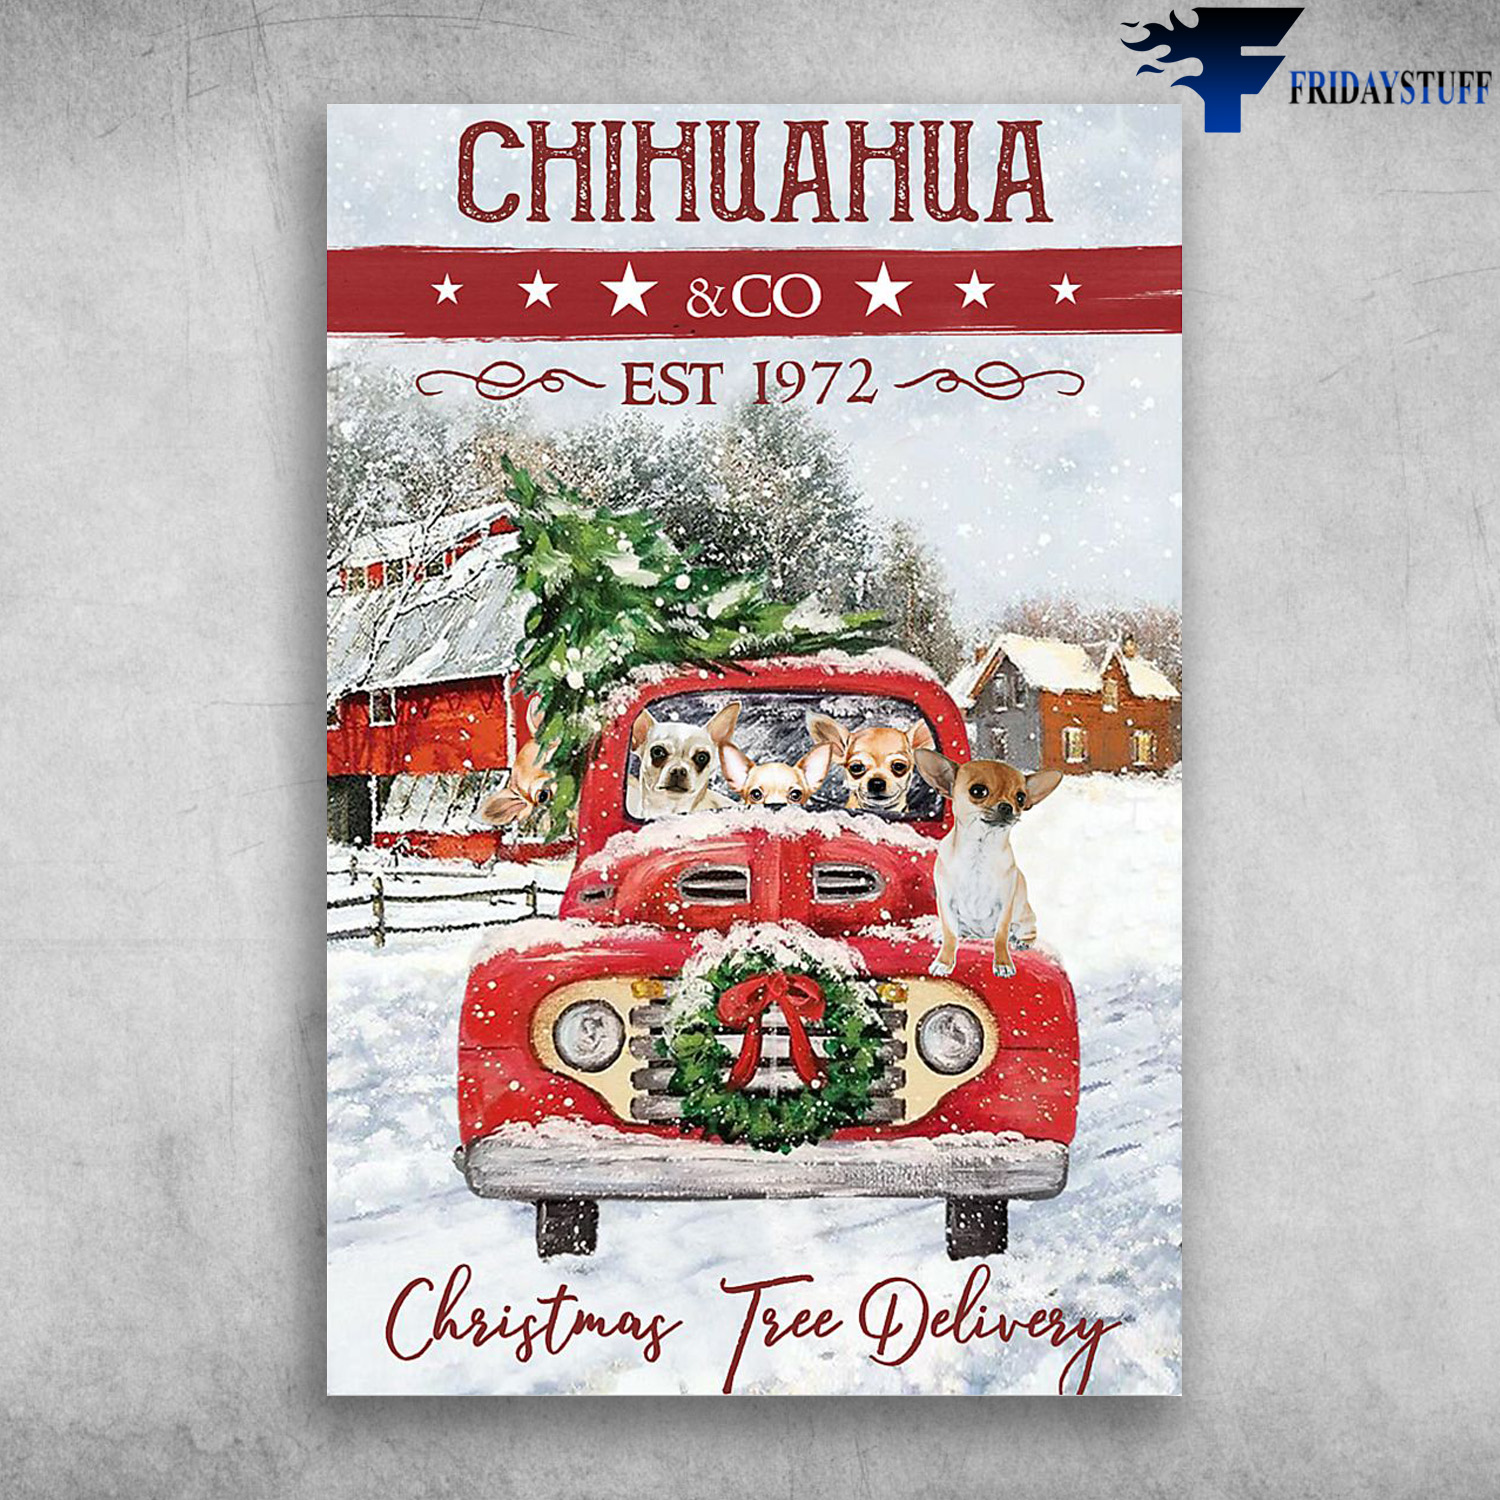 Chihuahua Dogs In Car - Christmas Tree Delivery